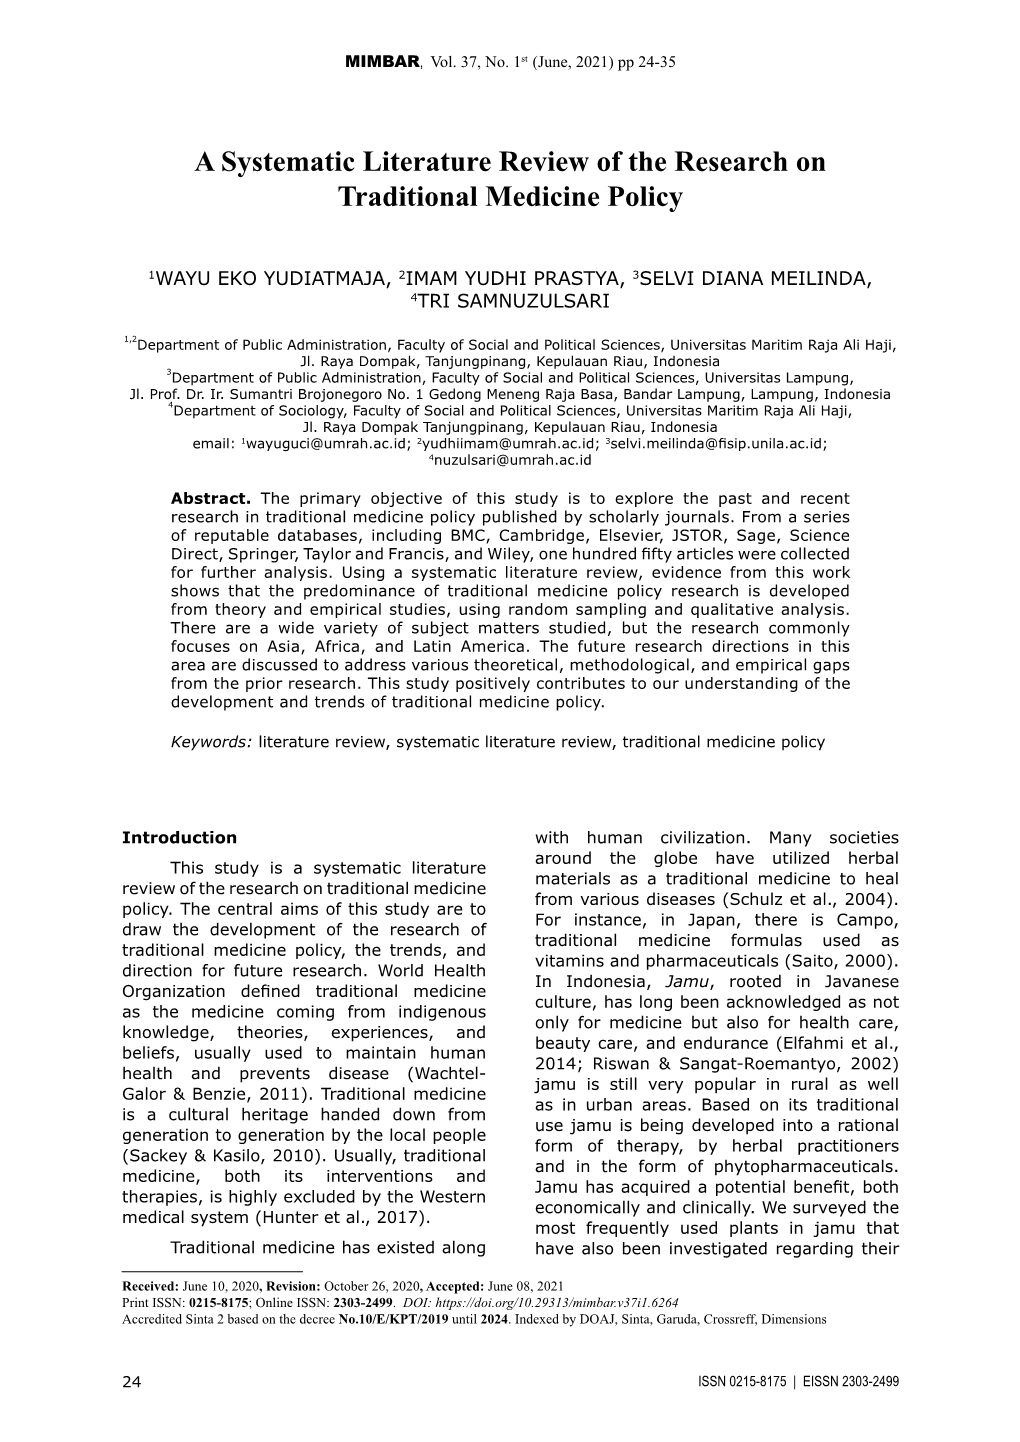 A Systematic Literature Review of the Research on Traditional Medicine Policy